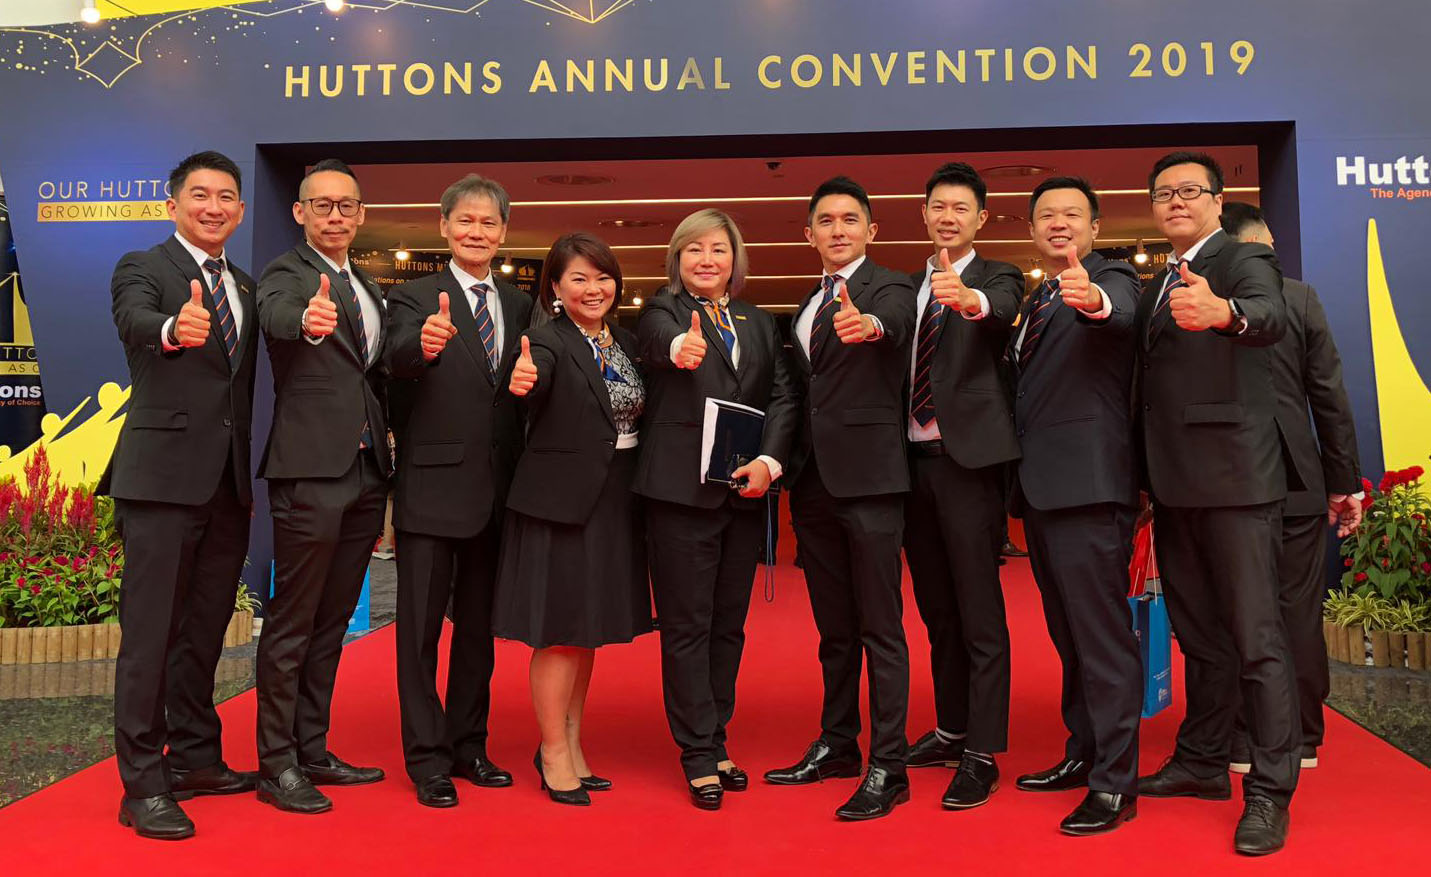 Huttons Annual Convention 2019